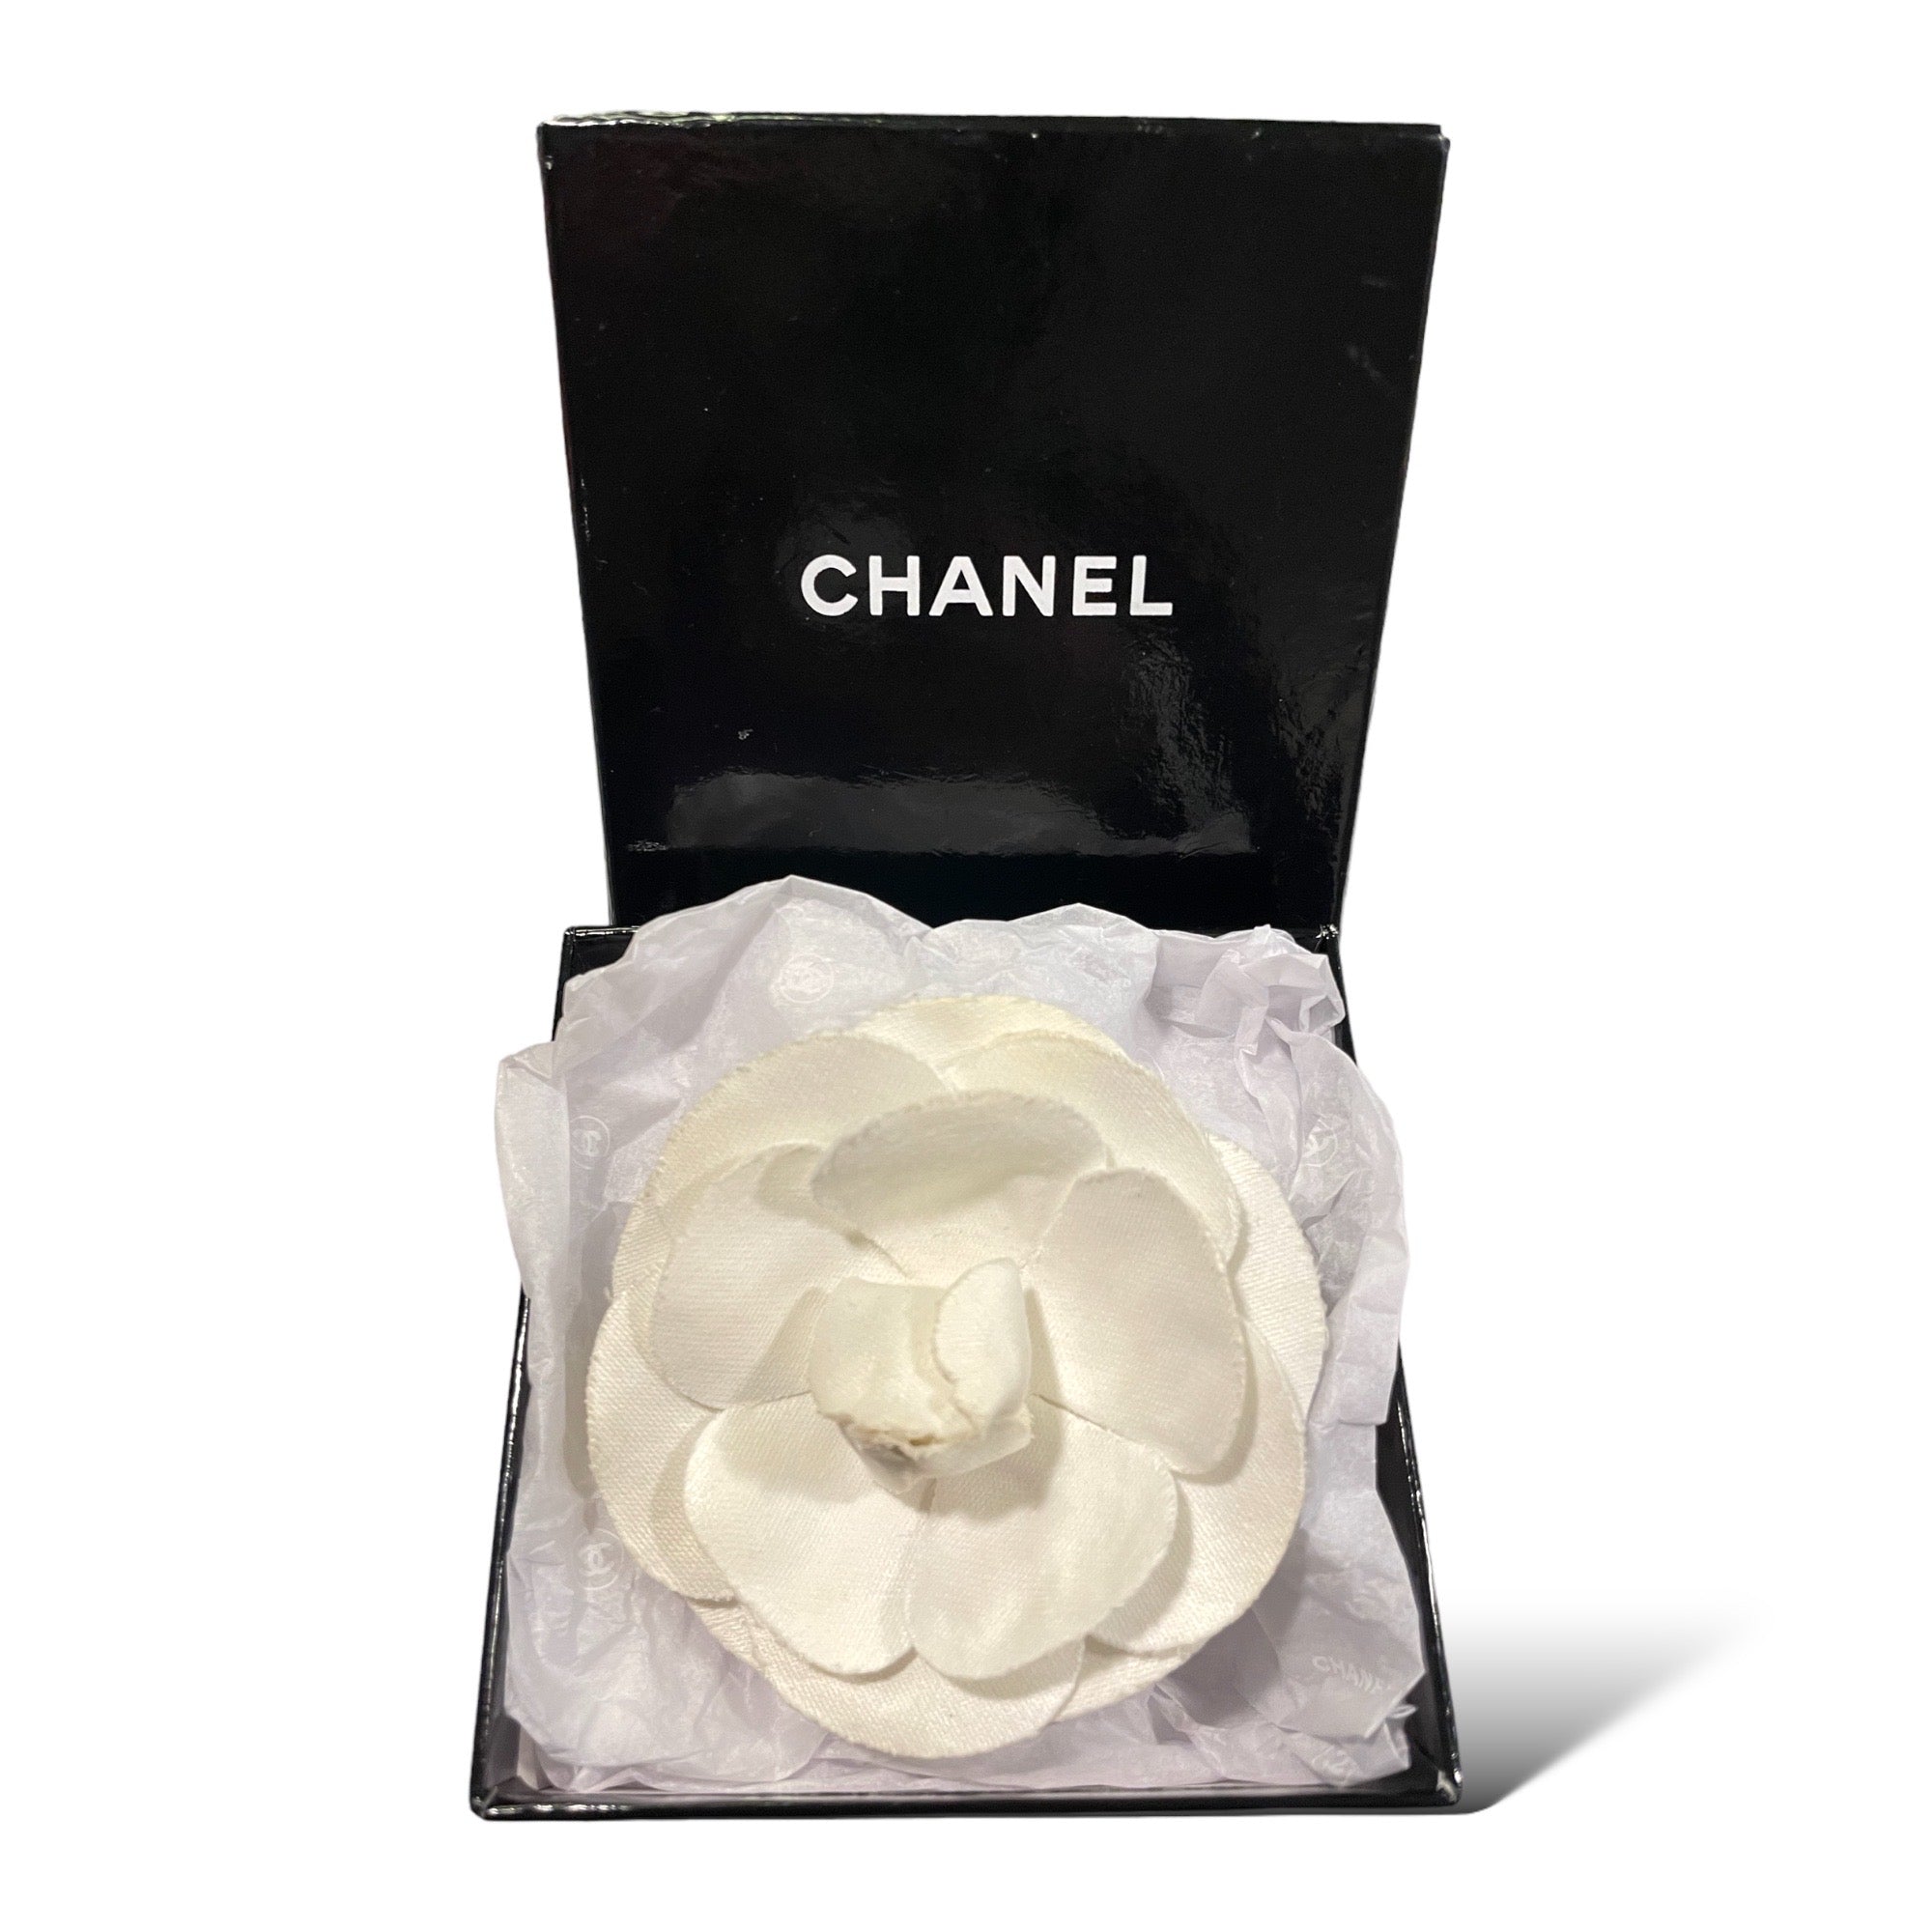 CHANEL WHITE CAMELLIA FLOWER PIN BROOCH IN ORIGINAL CHANEL GIFT BOX